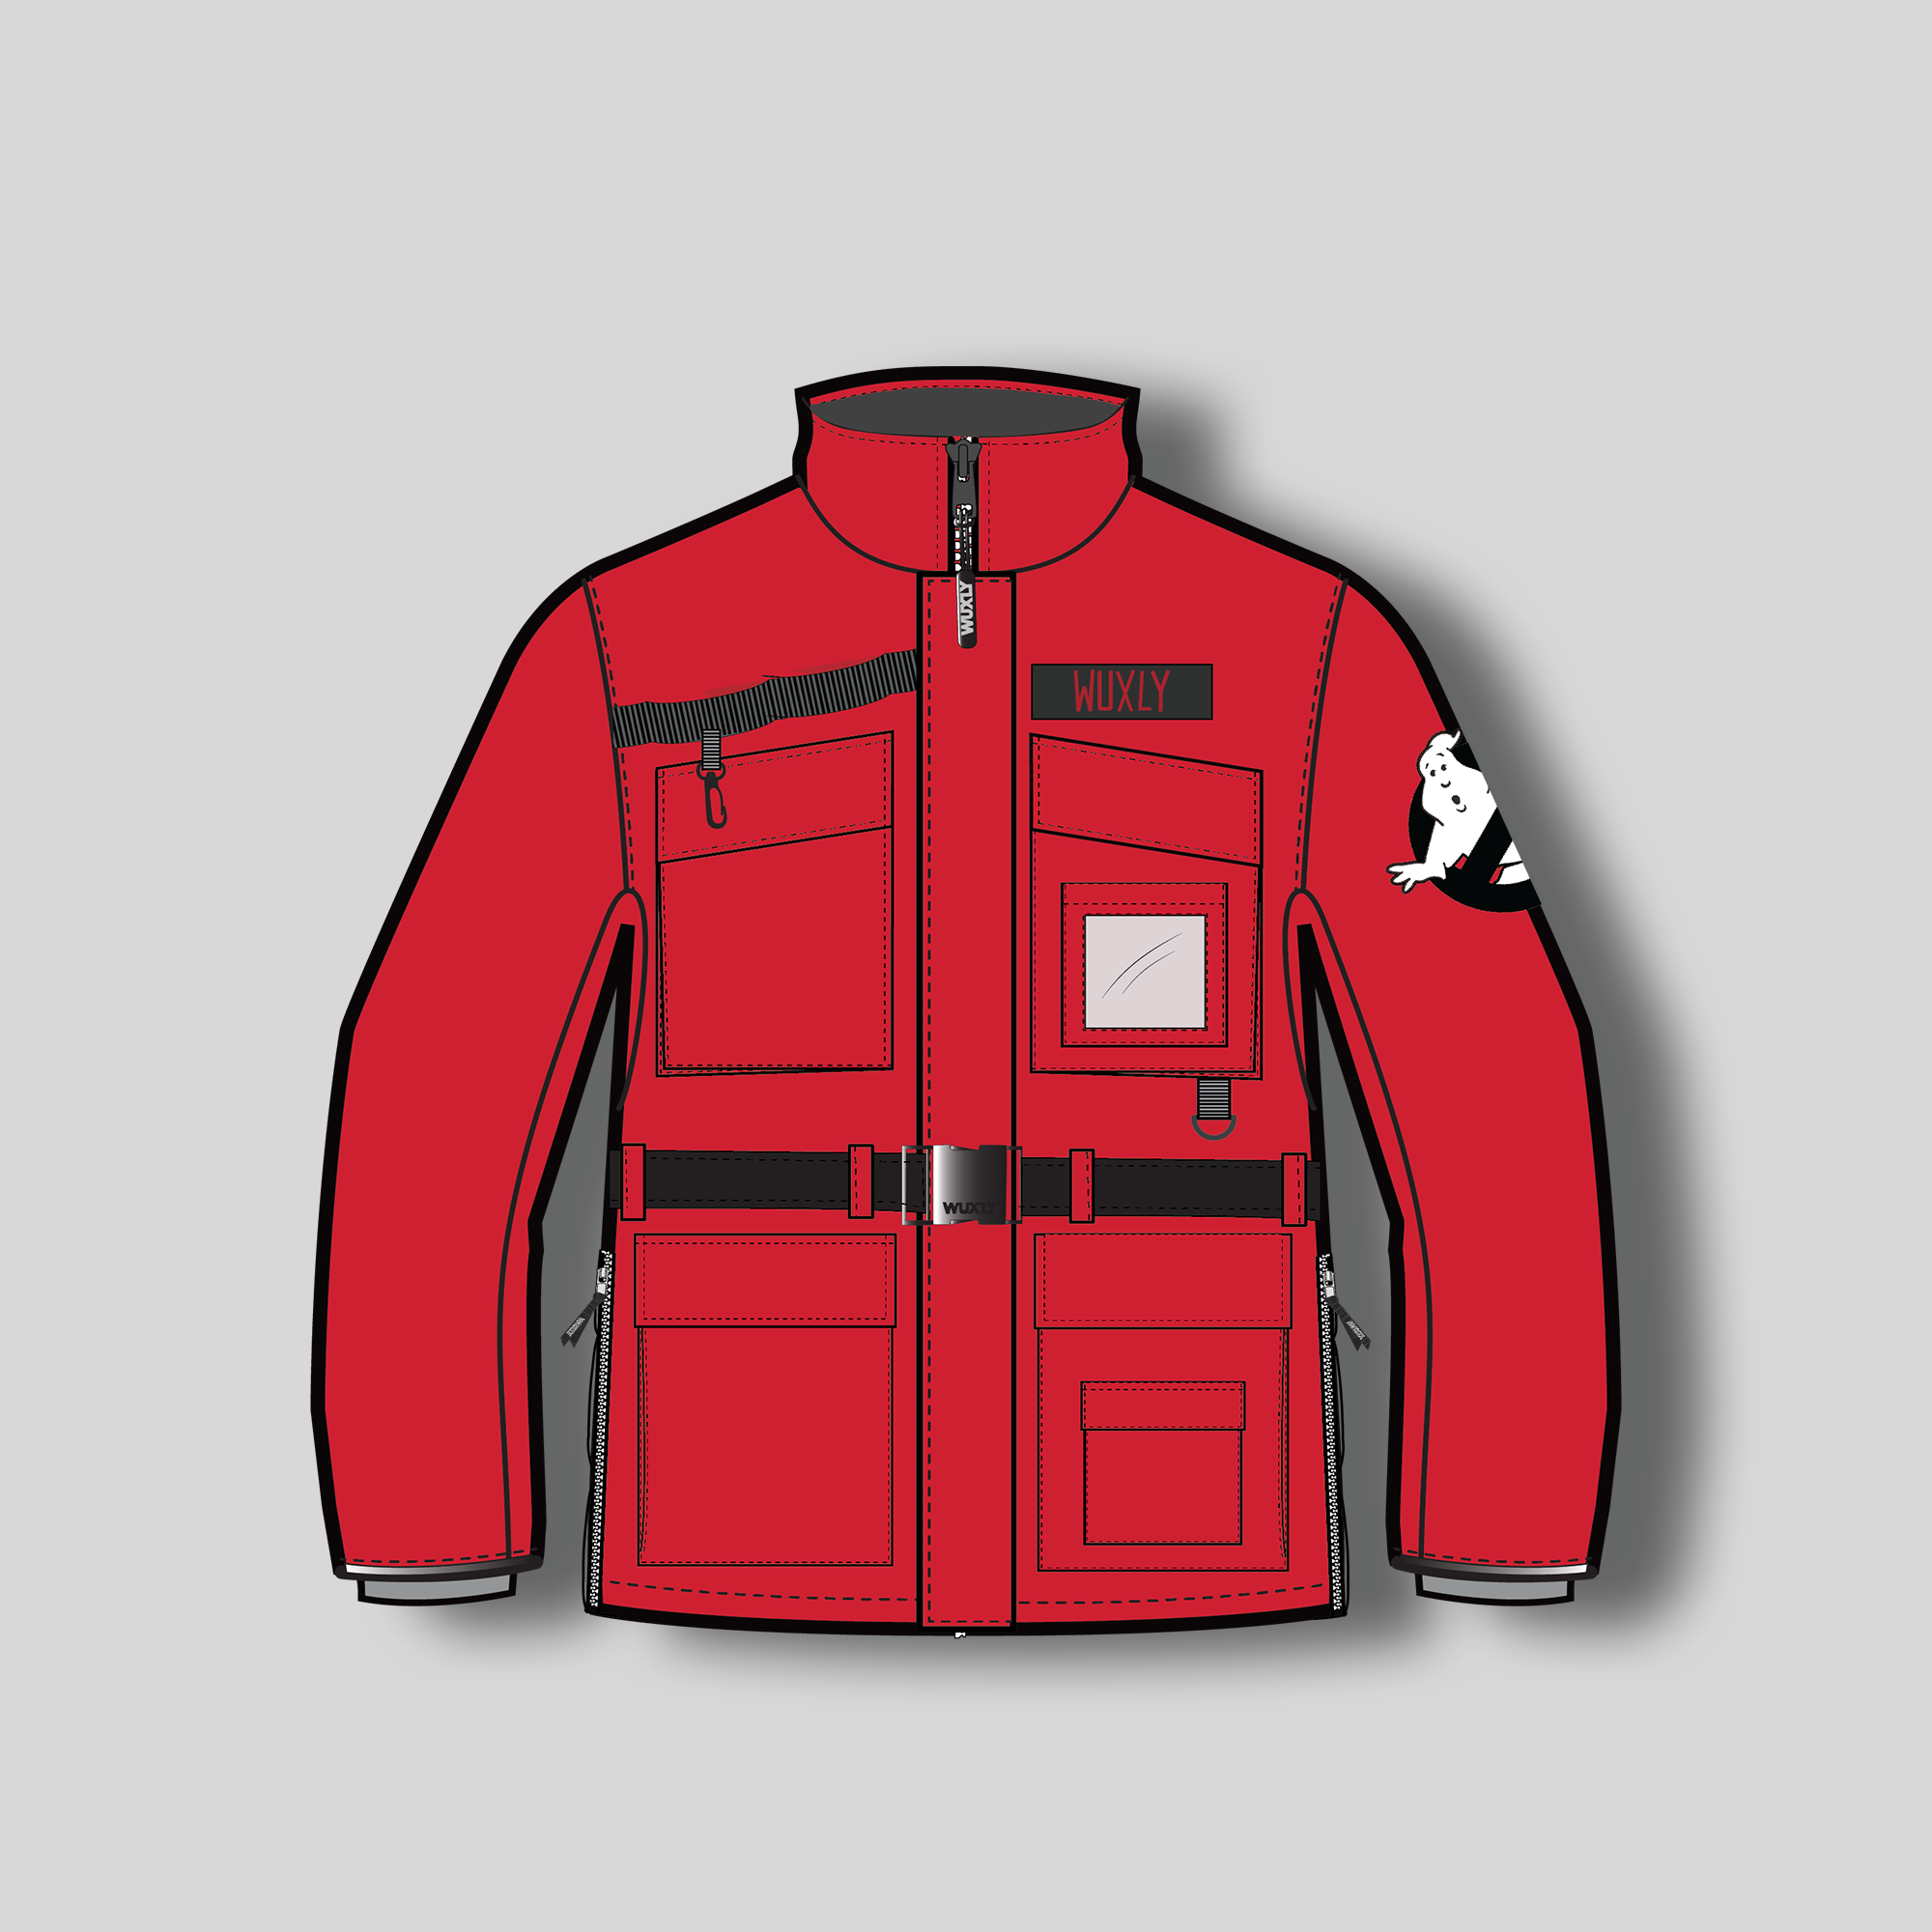 Ghostbusters-ShopifyImages-NameTagRedSpecialEditionSabertoothParka-R5.png